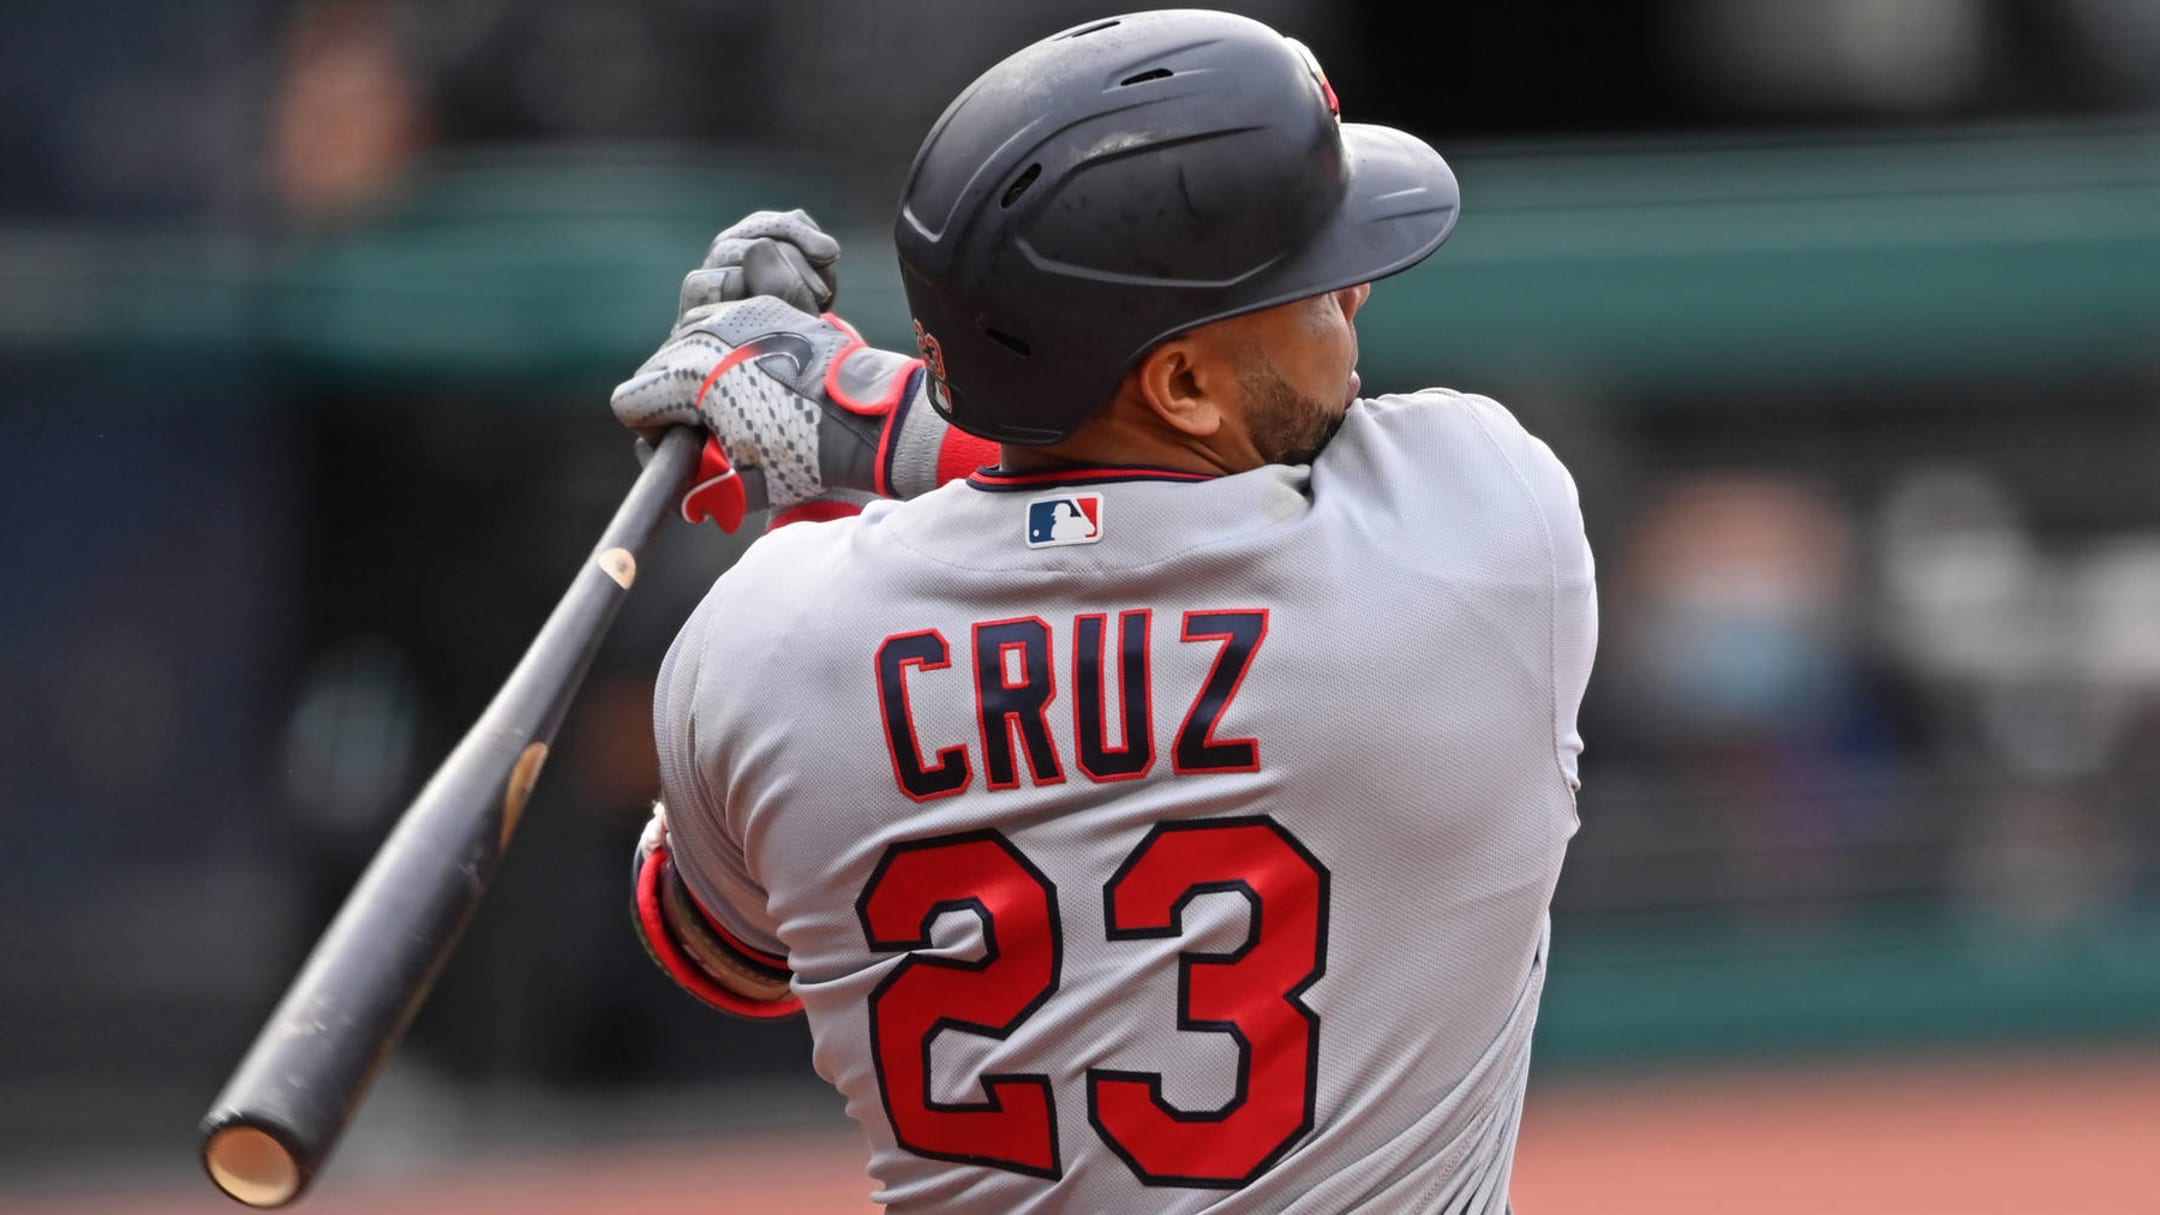 Rays rally past Tribe after trading for slugger Nelson Cruz